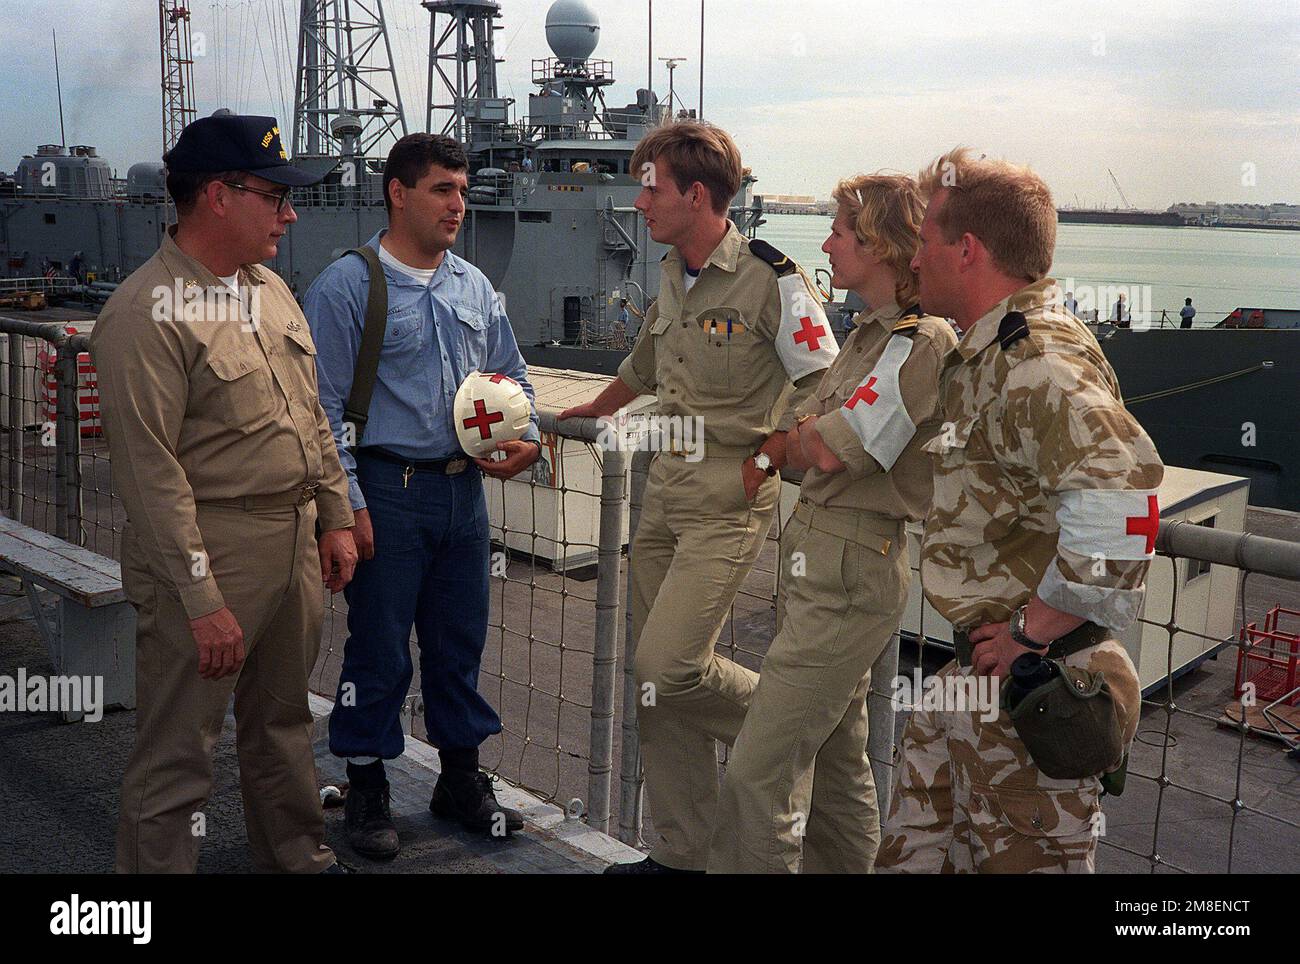 SENIOR CHIEF Hospital Corpsman W. C. Tutcher, left, and Hospital Corpsman 3rd Class Frank J. Chaves, second from left, compare notes with Dutch medical personnel on the deck of the Dutch fast combat support ship HNLMS ZUIDERKRUIS (A832) while the ship is in port during Operation Desert Storm. Tutcher and Chaves serve aboard the guided missile frigate USS MCINERNEY (FFG-8). Subject Operation/Series: DESERT STORM Country: Bahrain (BHR) Stock Photo